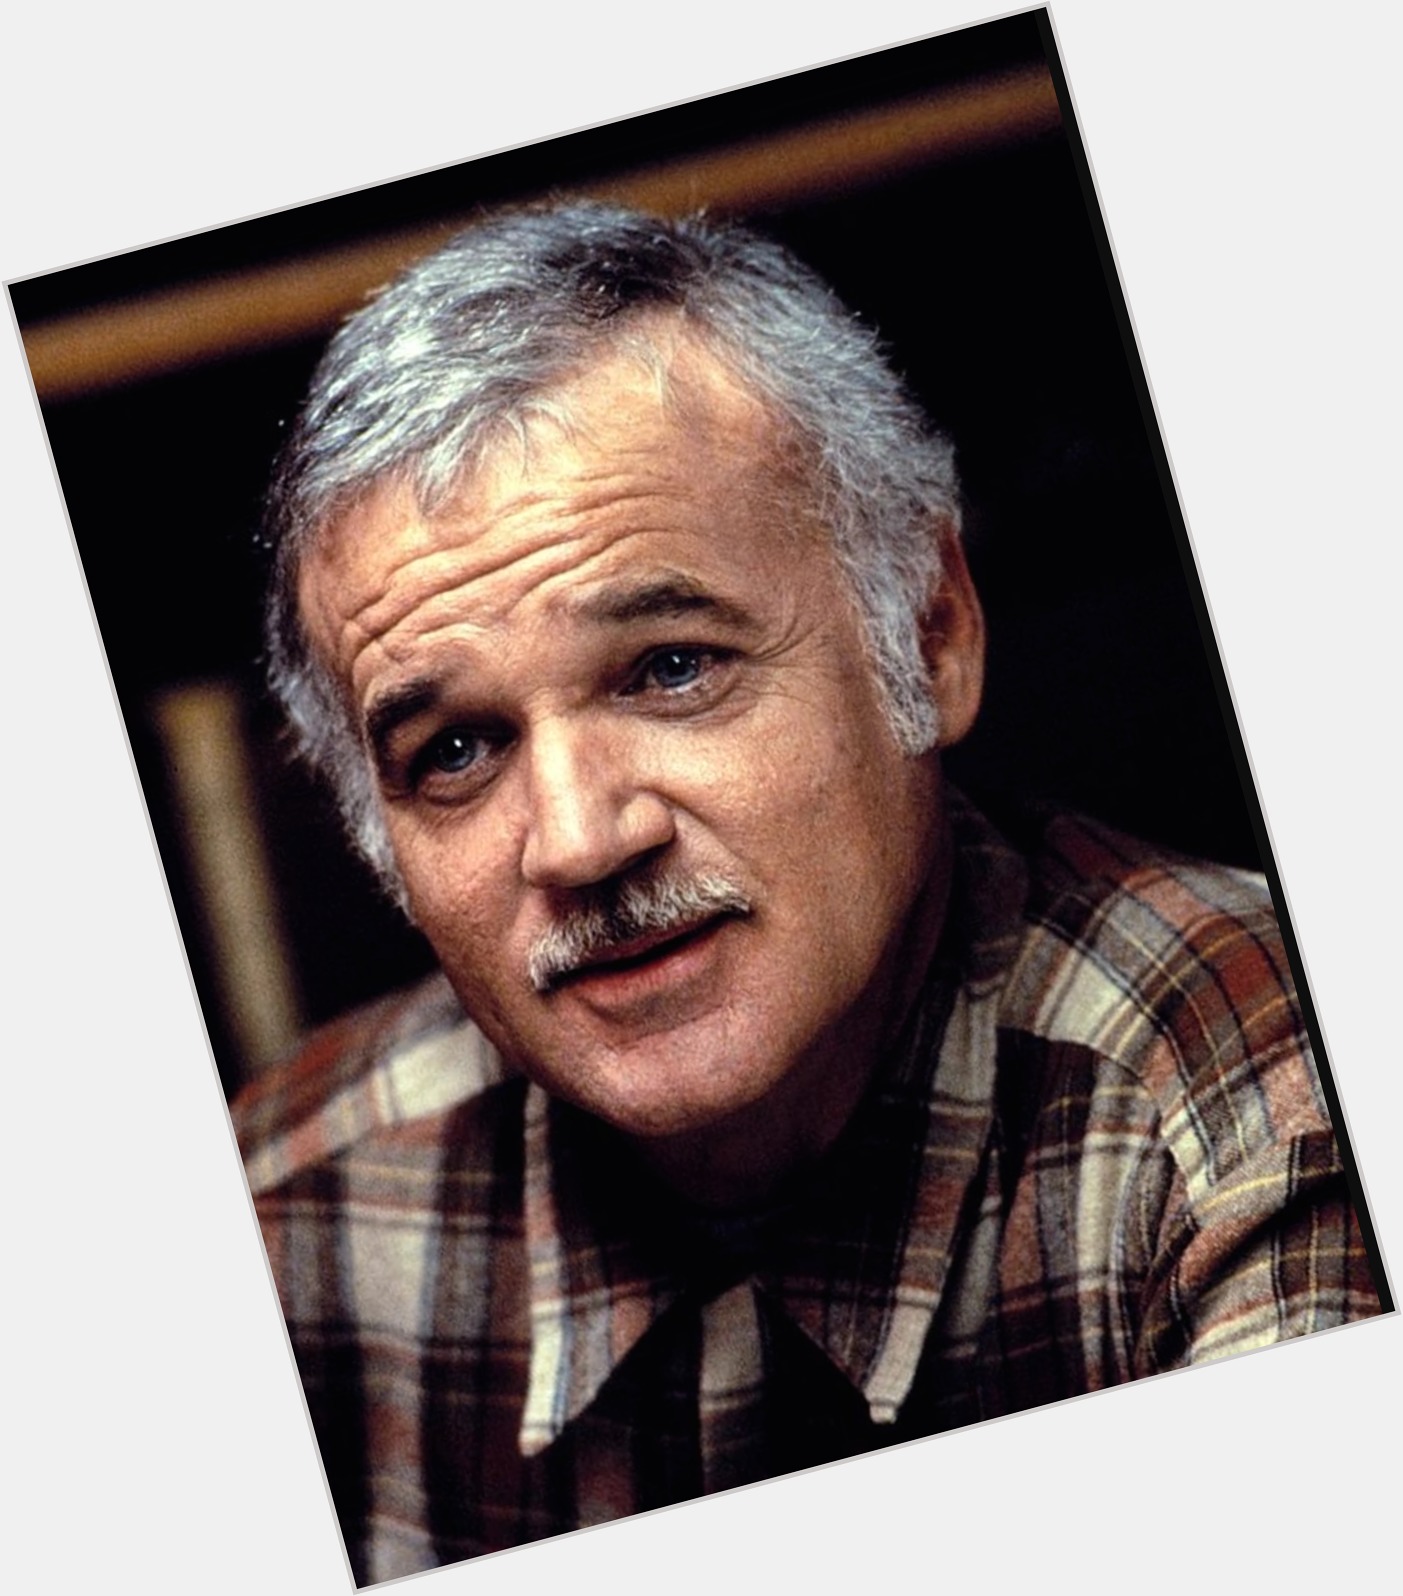 <a href="/hot-men/jack-nance/is-he-where-actor-eraserhead-client-tall">Jack Nance</a> Average body,  grey hair & hairstyles